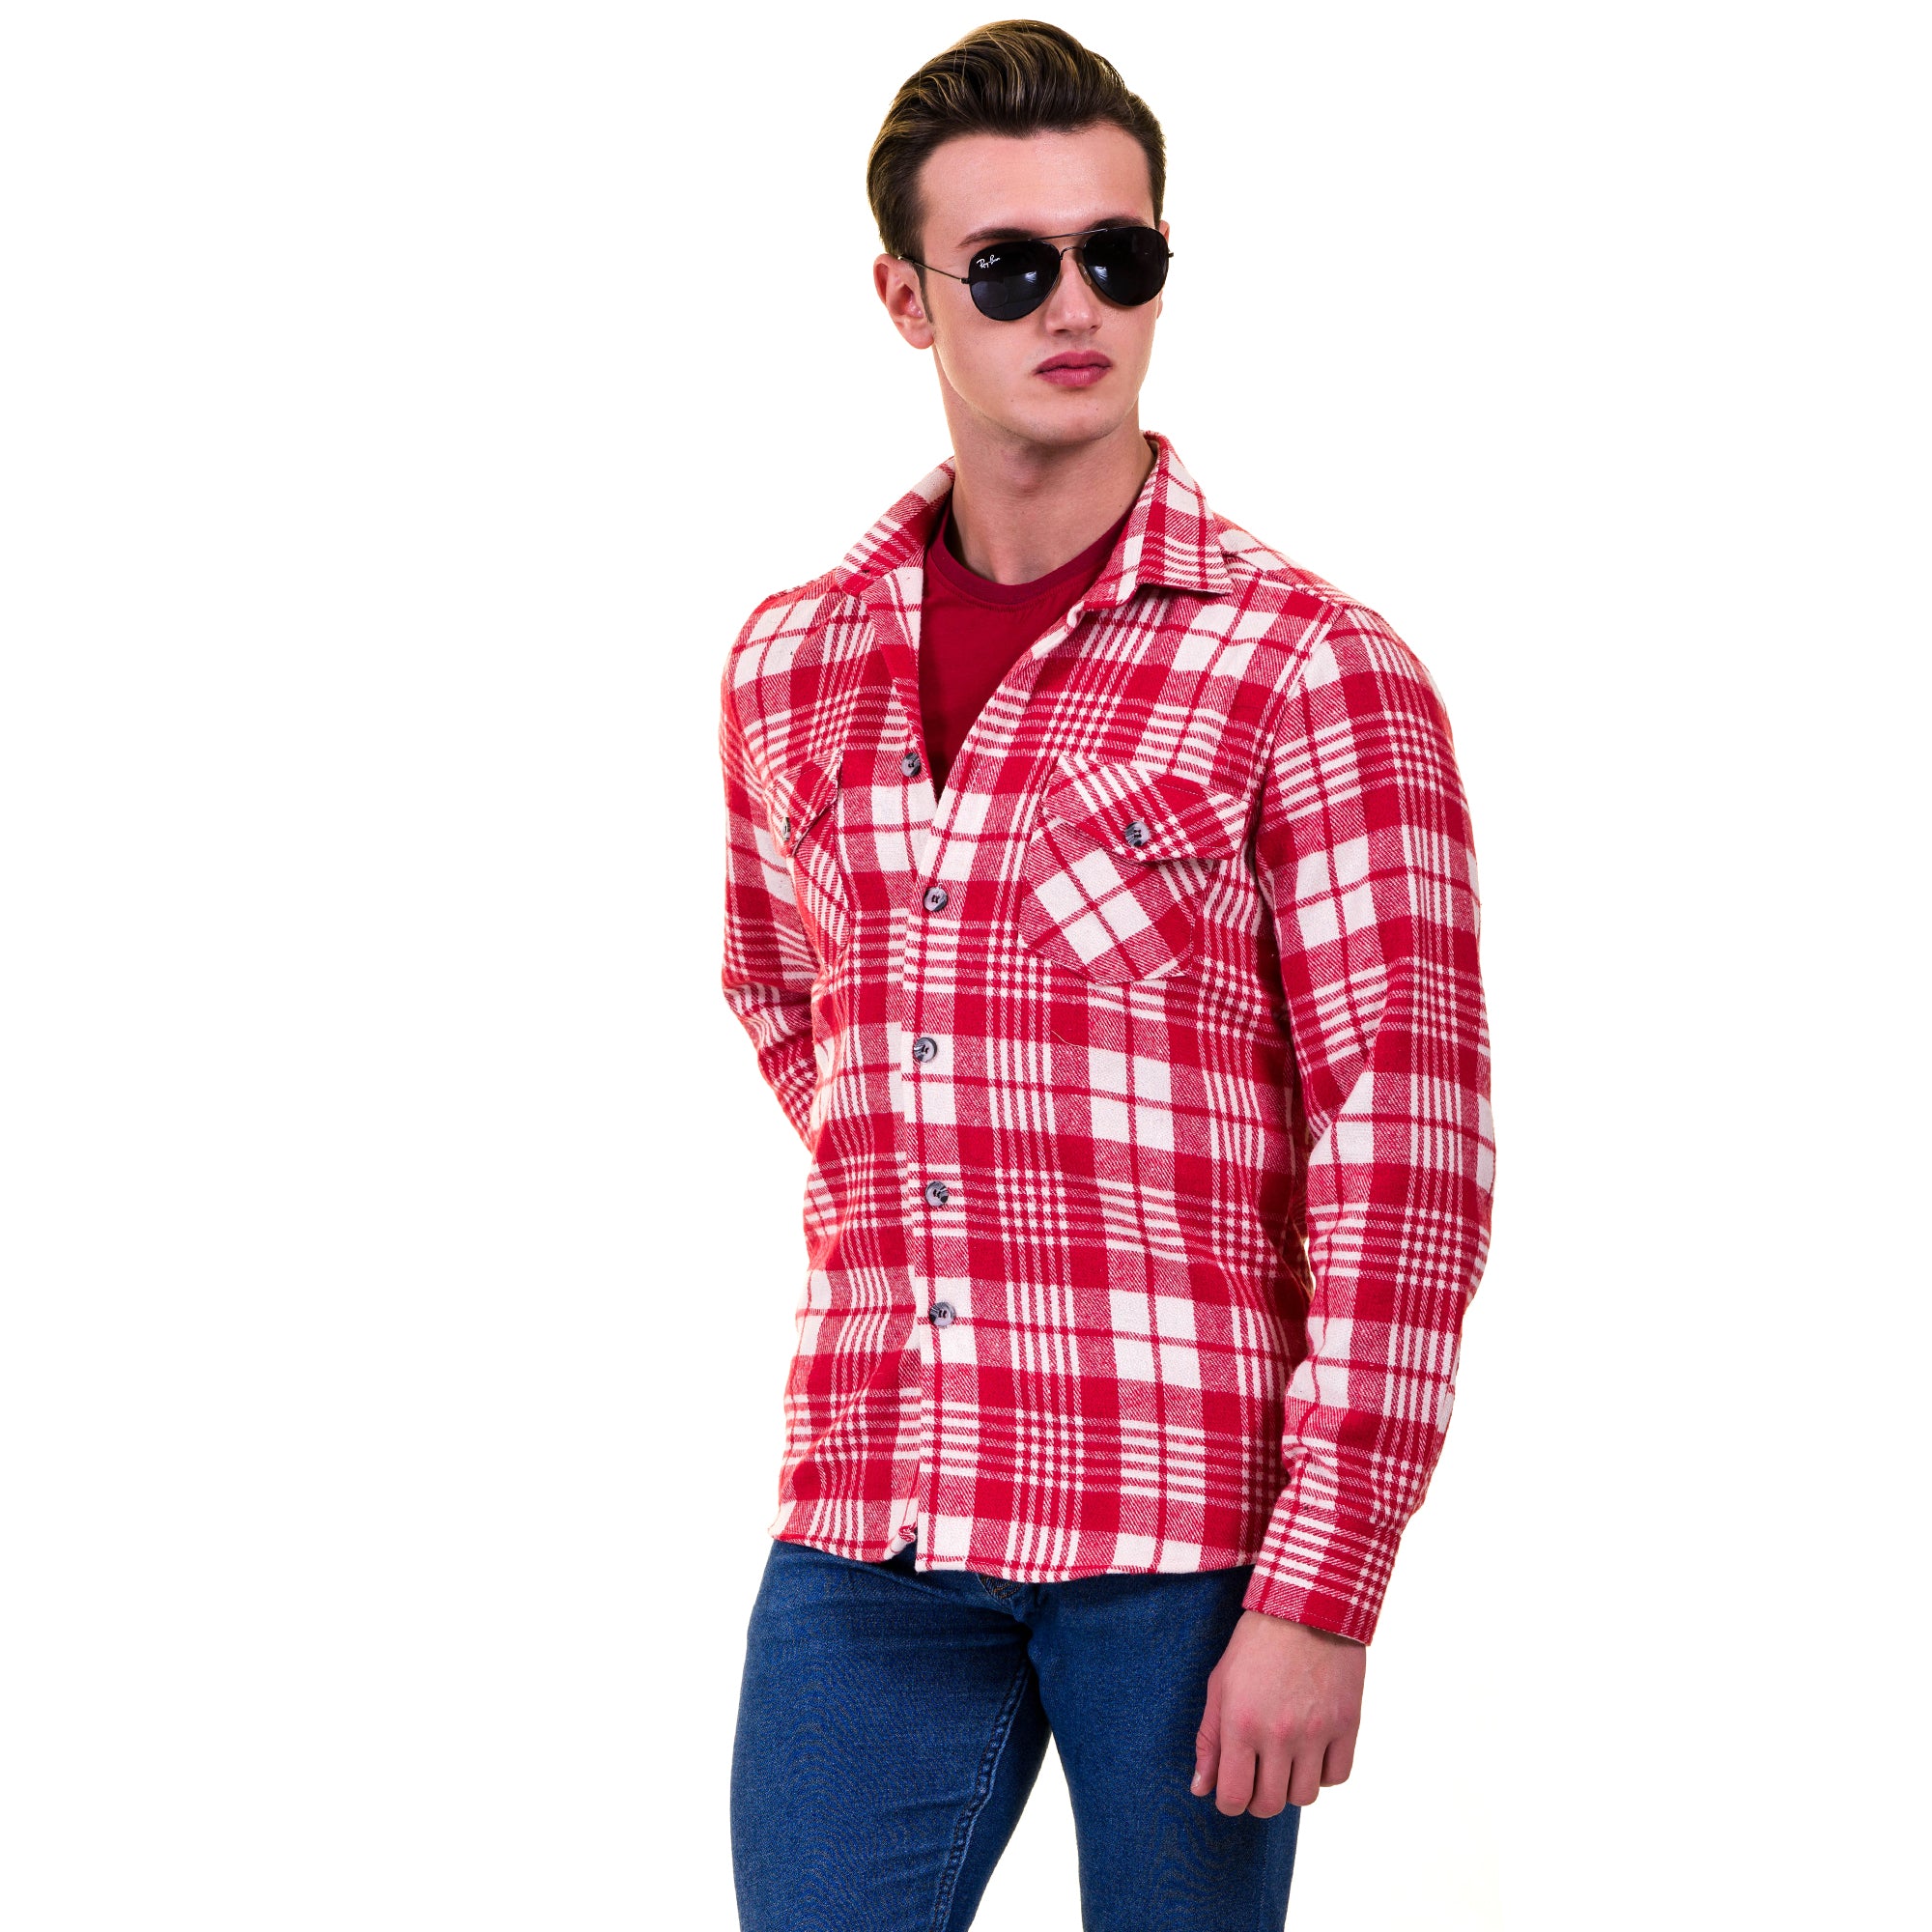 Red White Check Mens Slim Fit Designer Dress Shirt - tailored Cotton Shirts for Work and Casual Wear